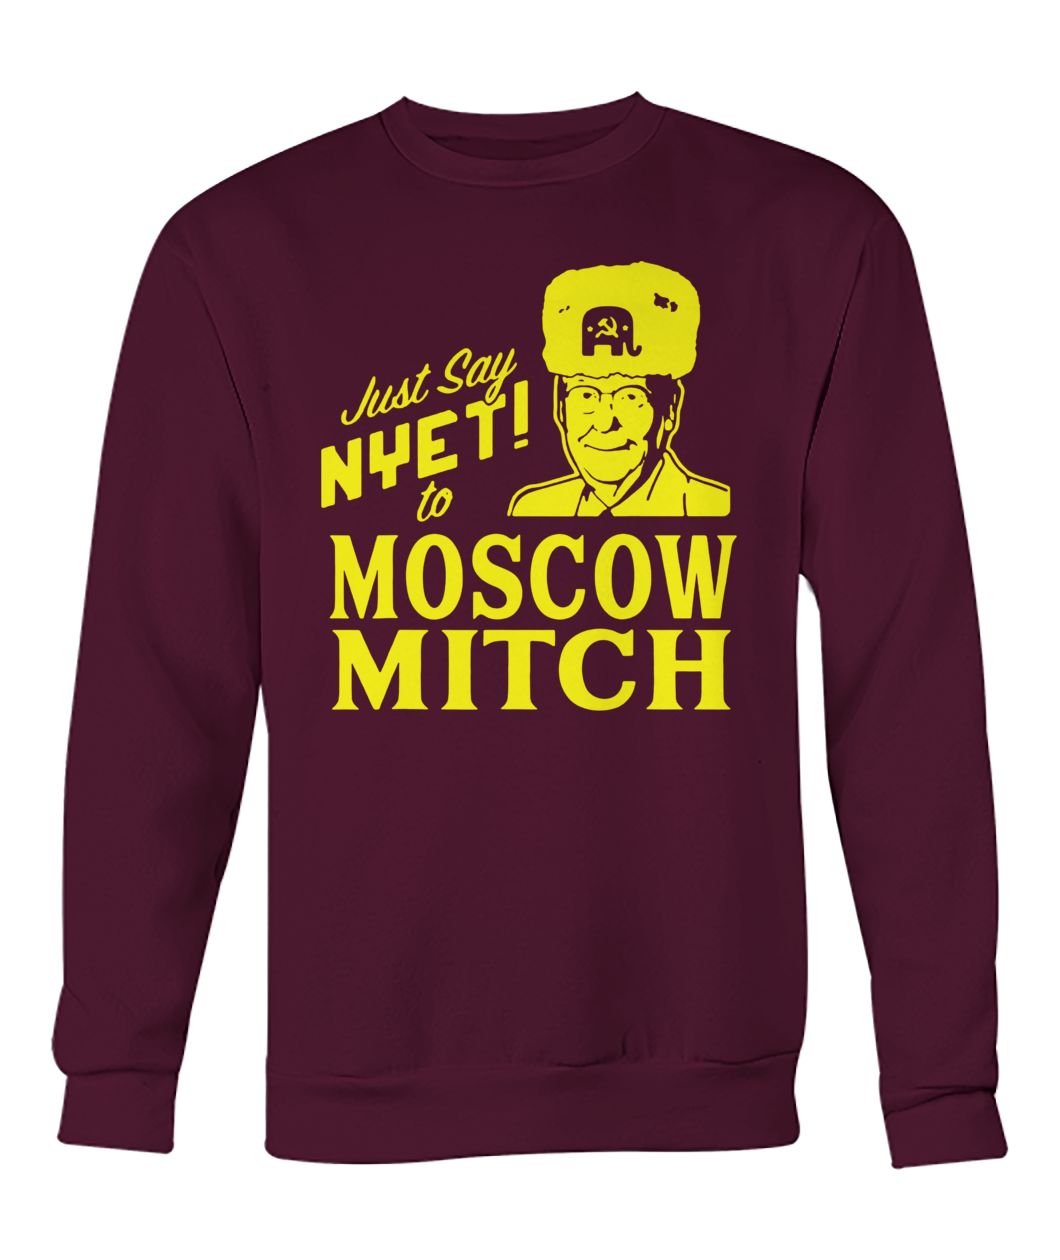 Mitch mcconnell just say nyet to moscow mitch crew neck sweatshirt